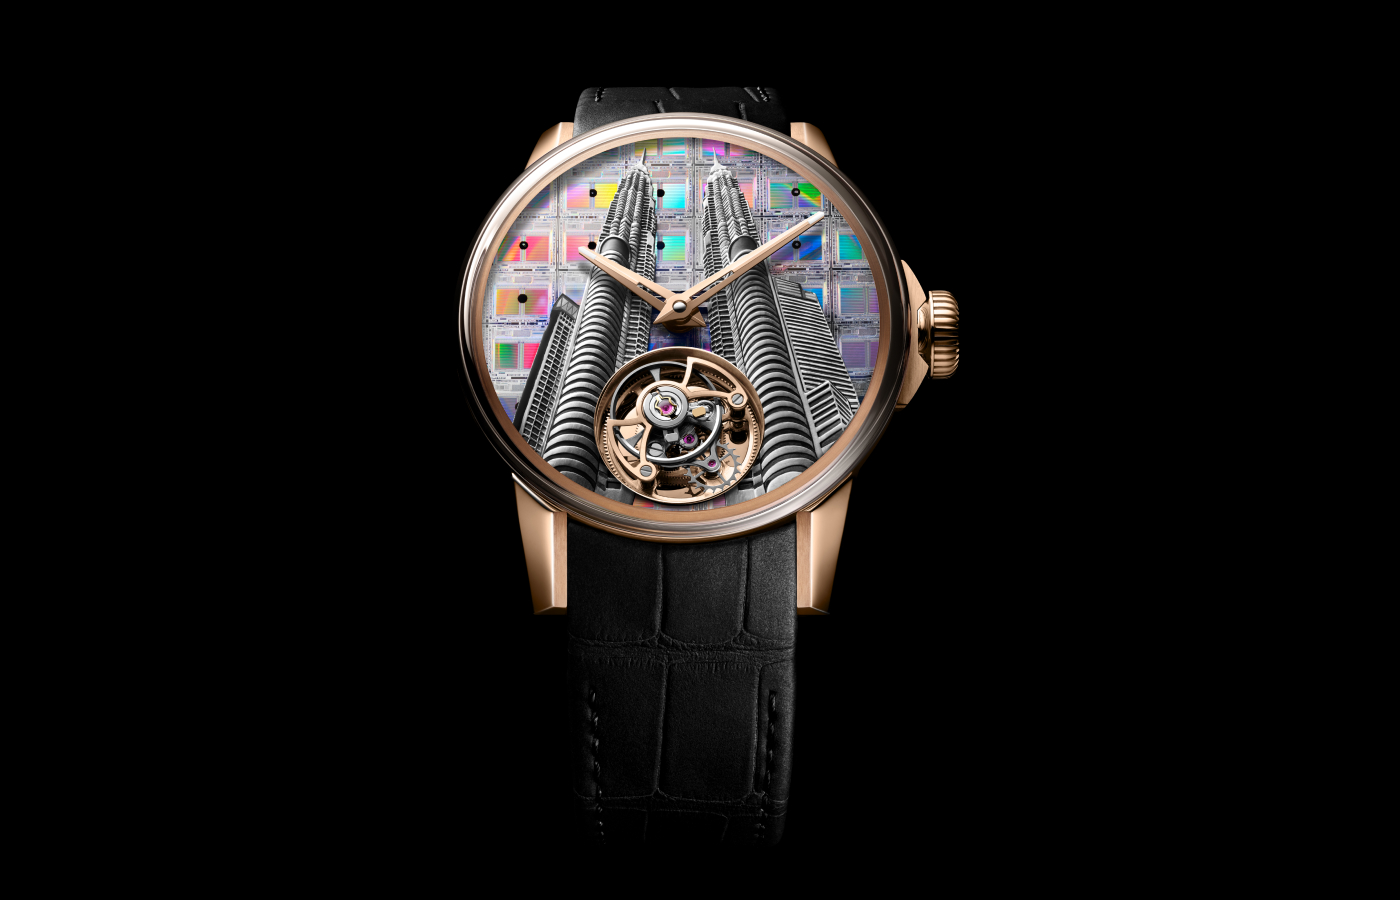 Louis Moinet Around the World Kuala Lumpur watch dial featuring the Petronas Towers crafted from silver on a silicon base engraved with microelectronic circuits